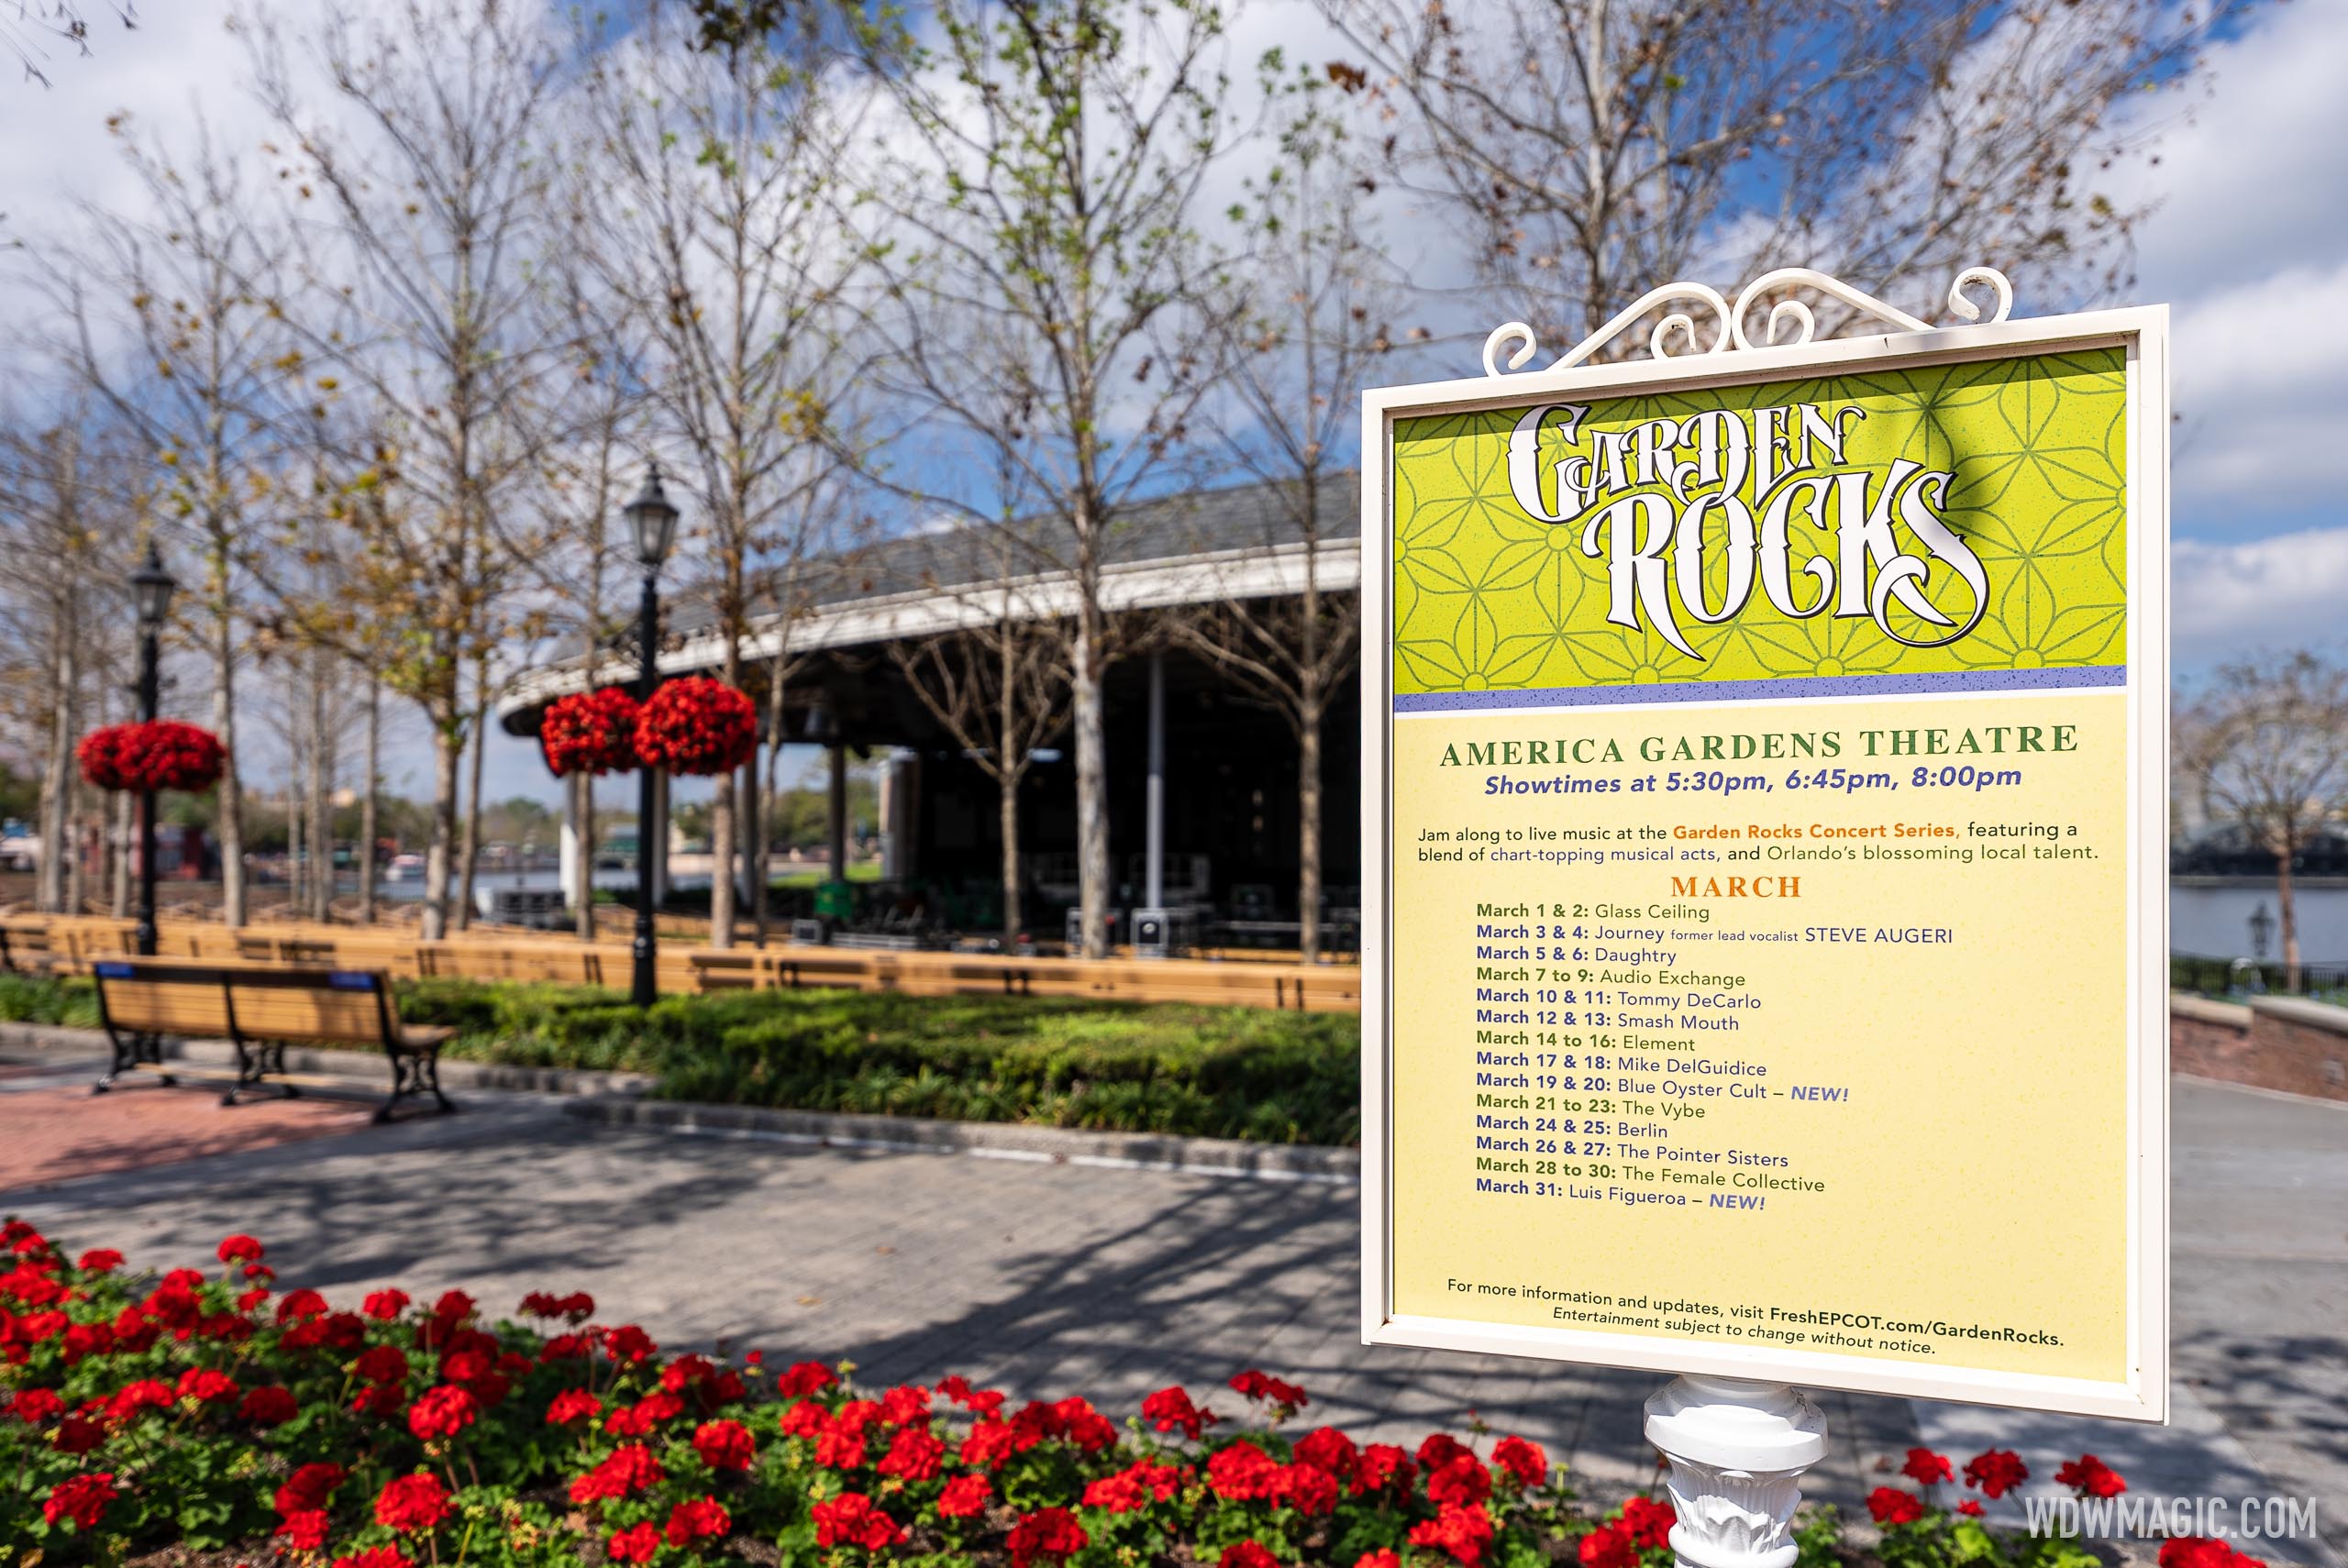 Local Orlando talent added to the line-up for the 2023 EPCOT Garden